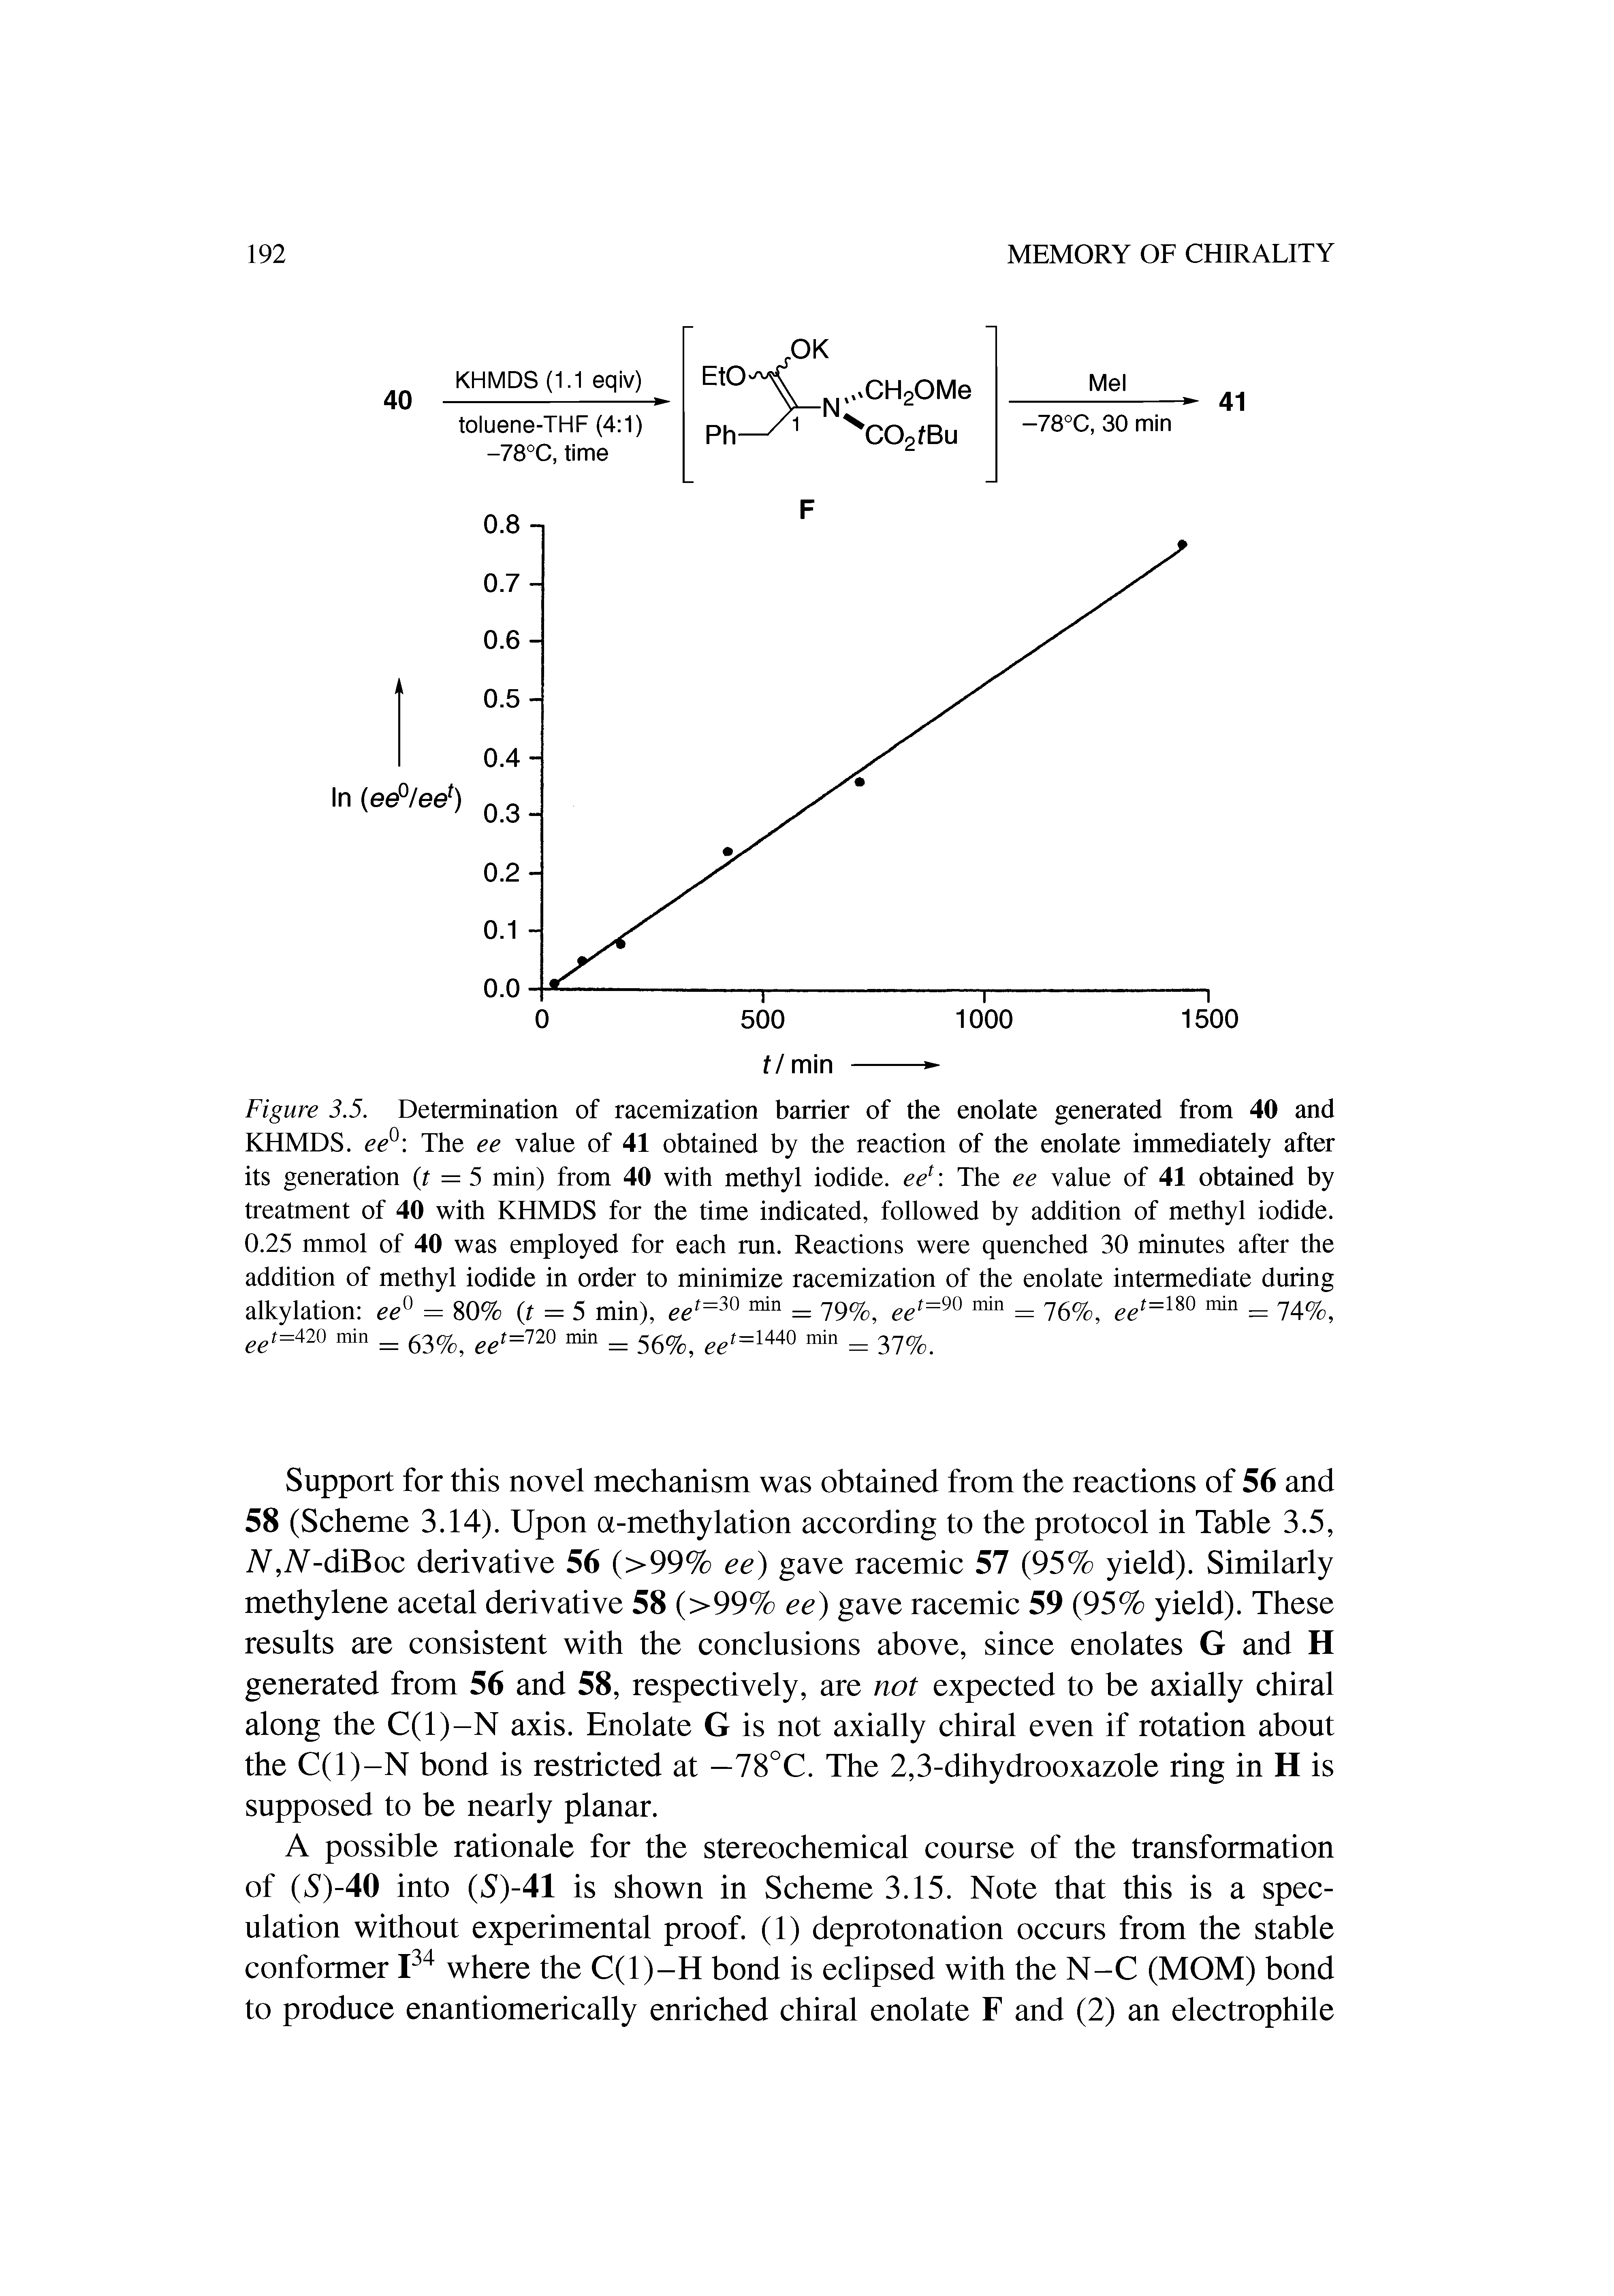 Figure 3.5. Determination of racemization barrier of the enolate generated from 40 and KHMDS. ee° The ee value of 41 obtained by the reaction of the enolate immediately after its generation (t = 5 min) from 40 with methyl iodide, ee1 The ee value of 41 obtained by treatment of 40 with KHMDS for the time indicated, followed by addition of methyl iodide. 0.25 mmol of 40 was employed for each run. Reactions were quenched 30 minutes after the addition of methyl iodide in order to minimize racemization of the enolate intermediate during alkylation ee° = 80% (t = 5 min), ee1=3° 111111 = 79%, 1=90 111111 = 76%, eet=m = 74%, eet=42° = 63%, eet=12° = 56%, 1=1440 111111 = 37%.